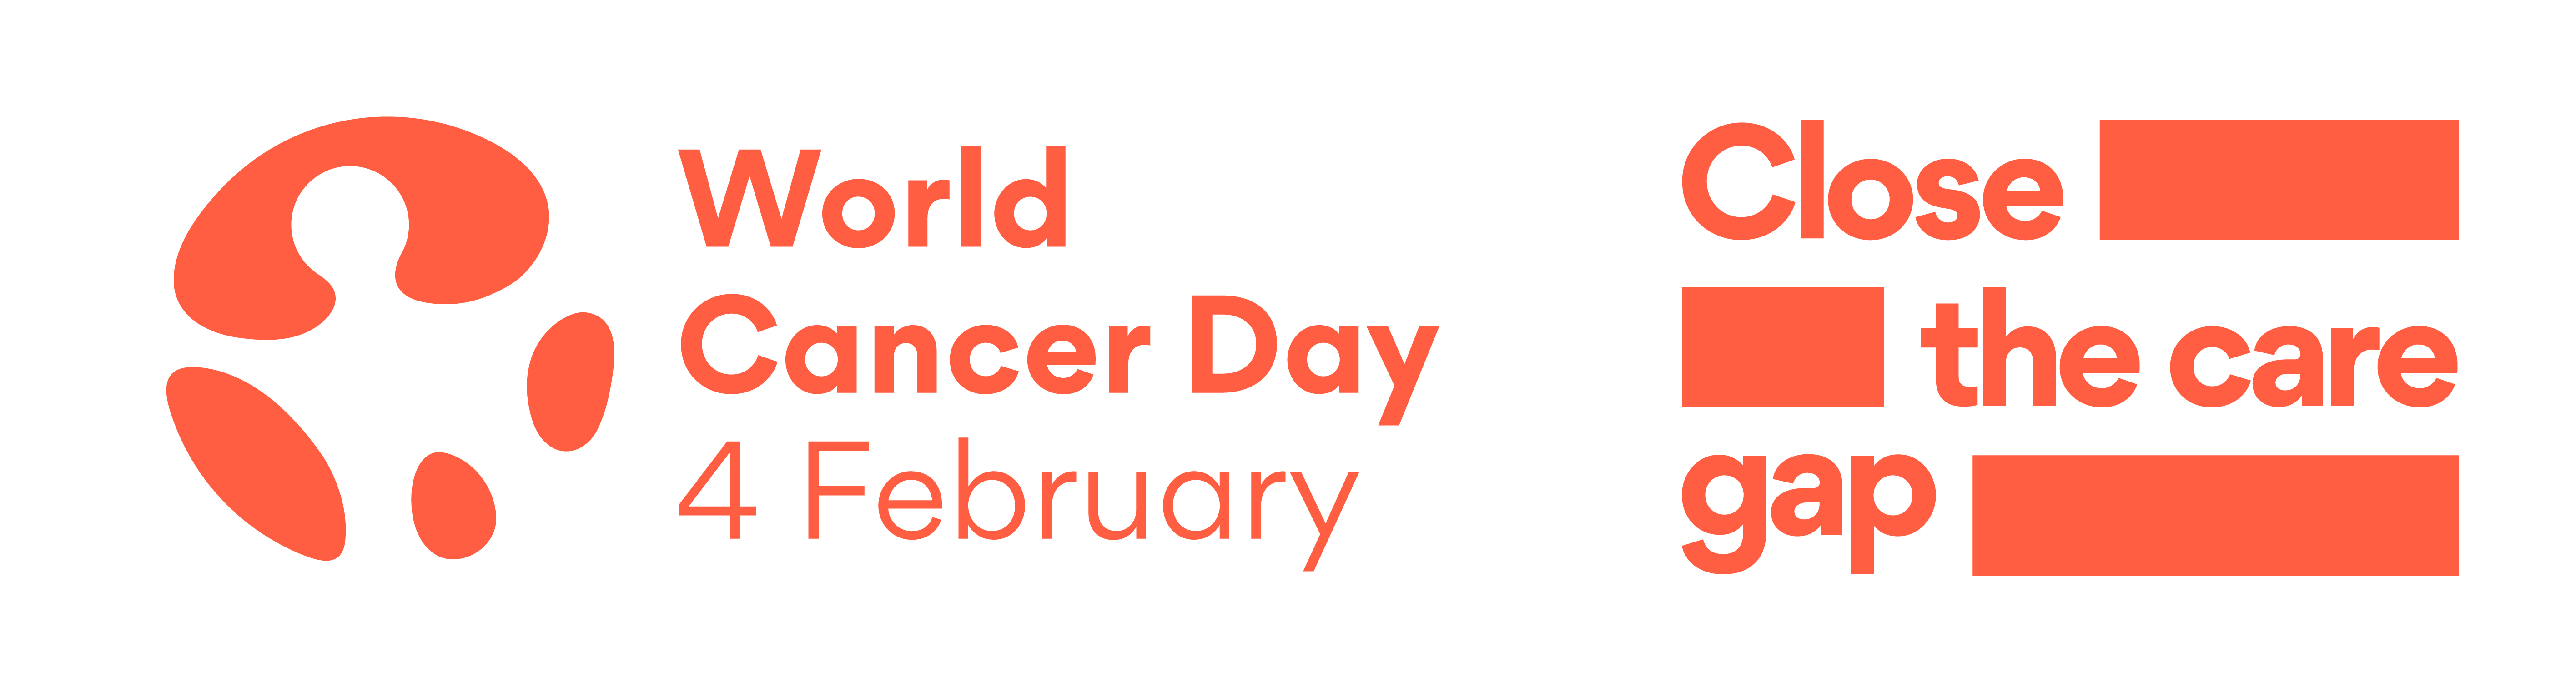 'World Cancer Day 4 February' and 'Close the Care Gap' theme logos, in orange on a white background.